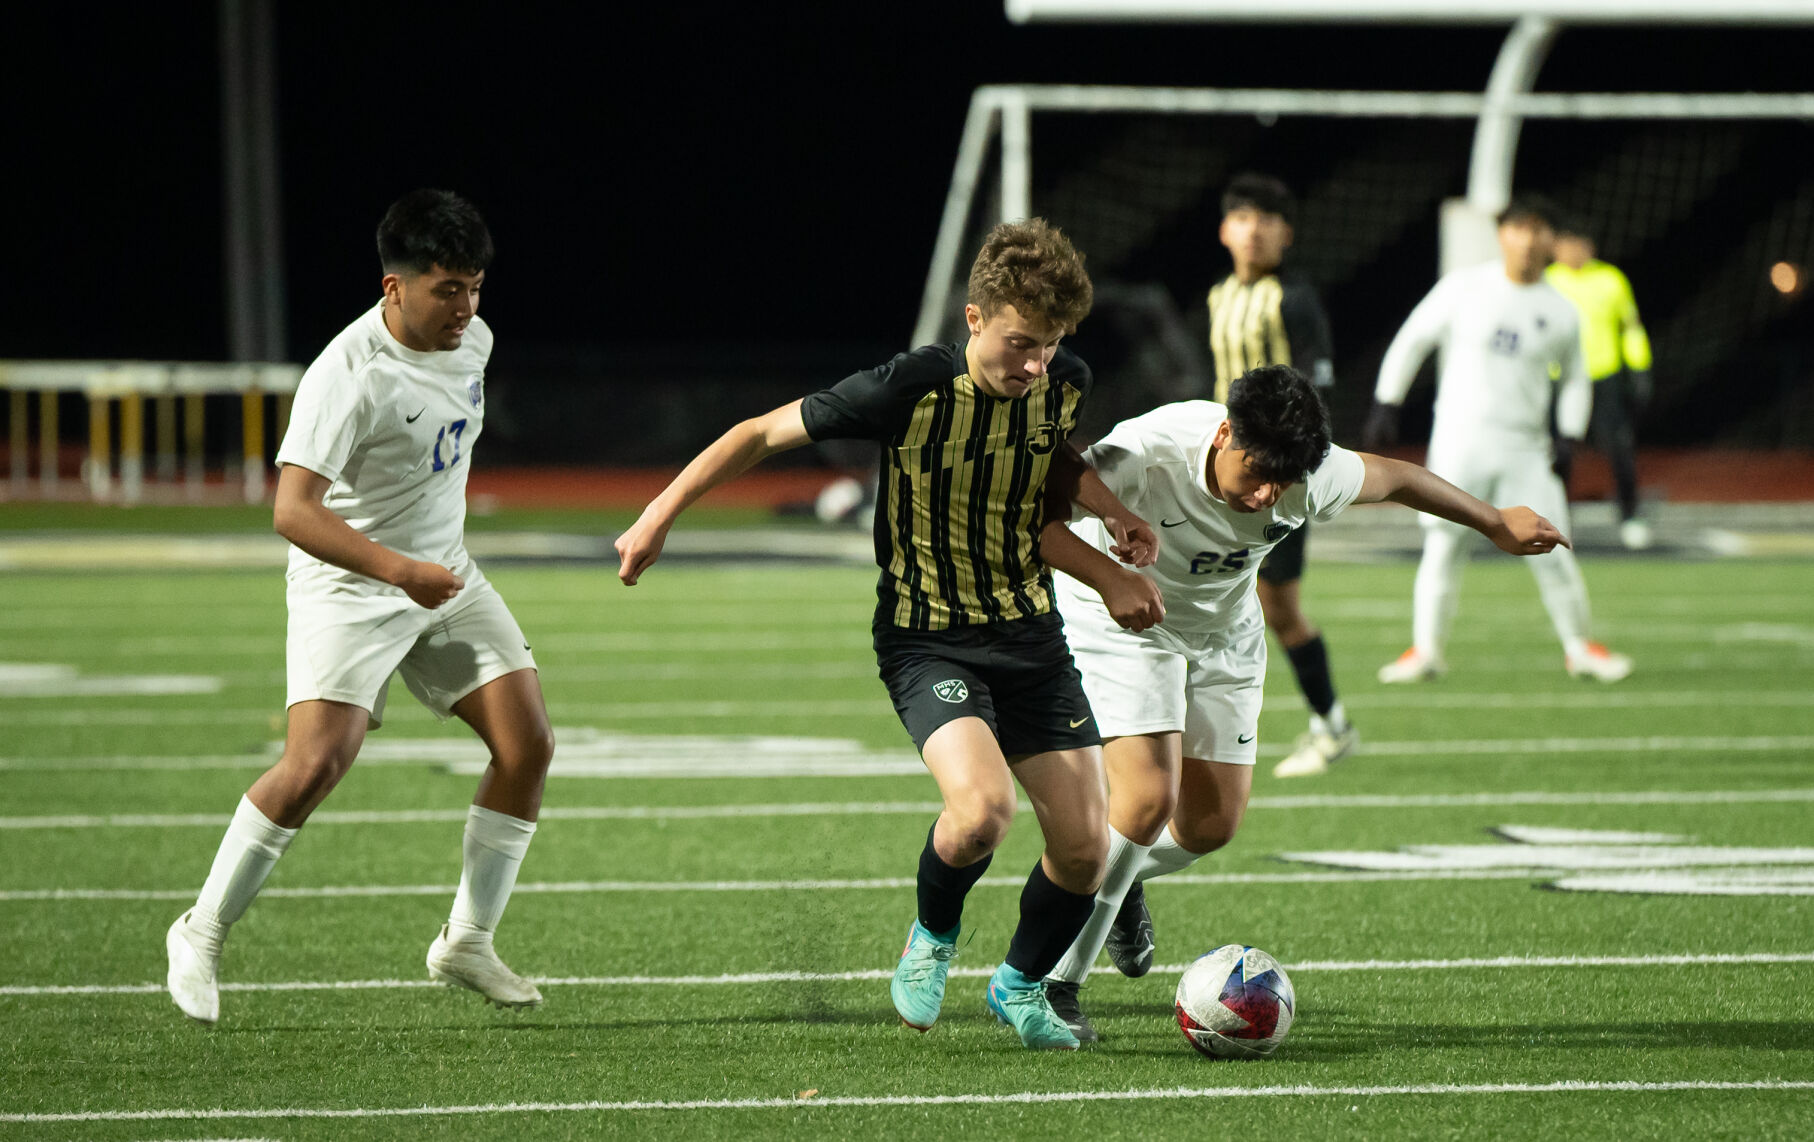 Heavener’s Strong Defense and Penalty Kick Secure 2-0 Win over McAlester in Season Opener